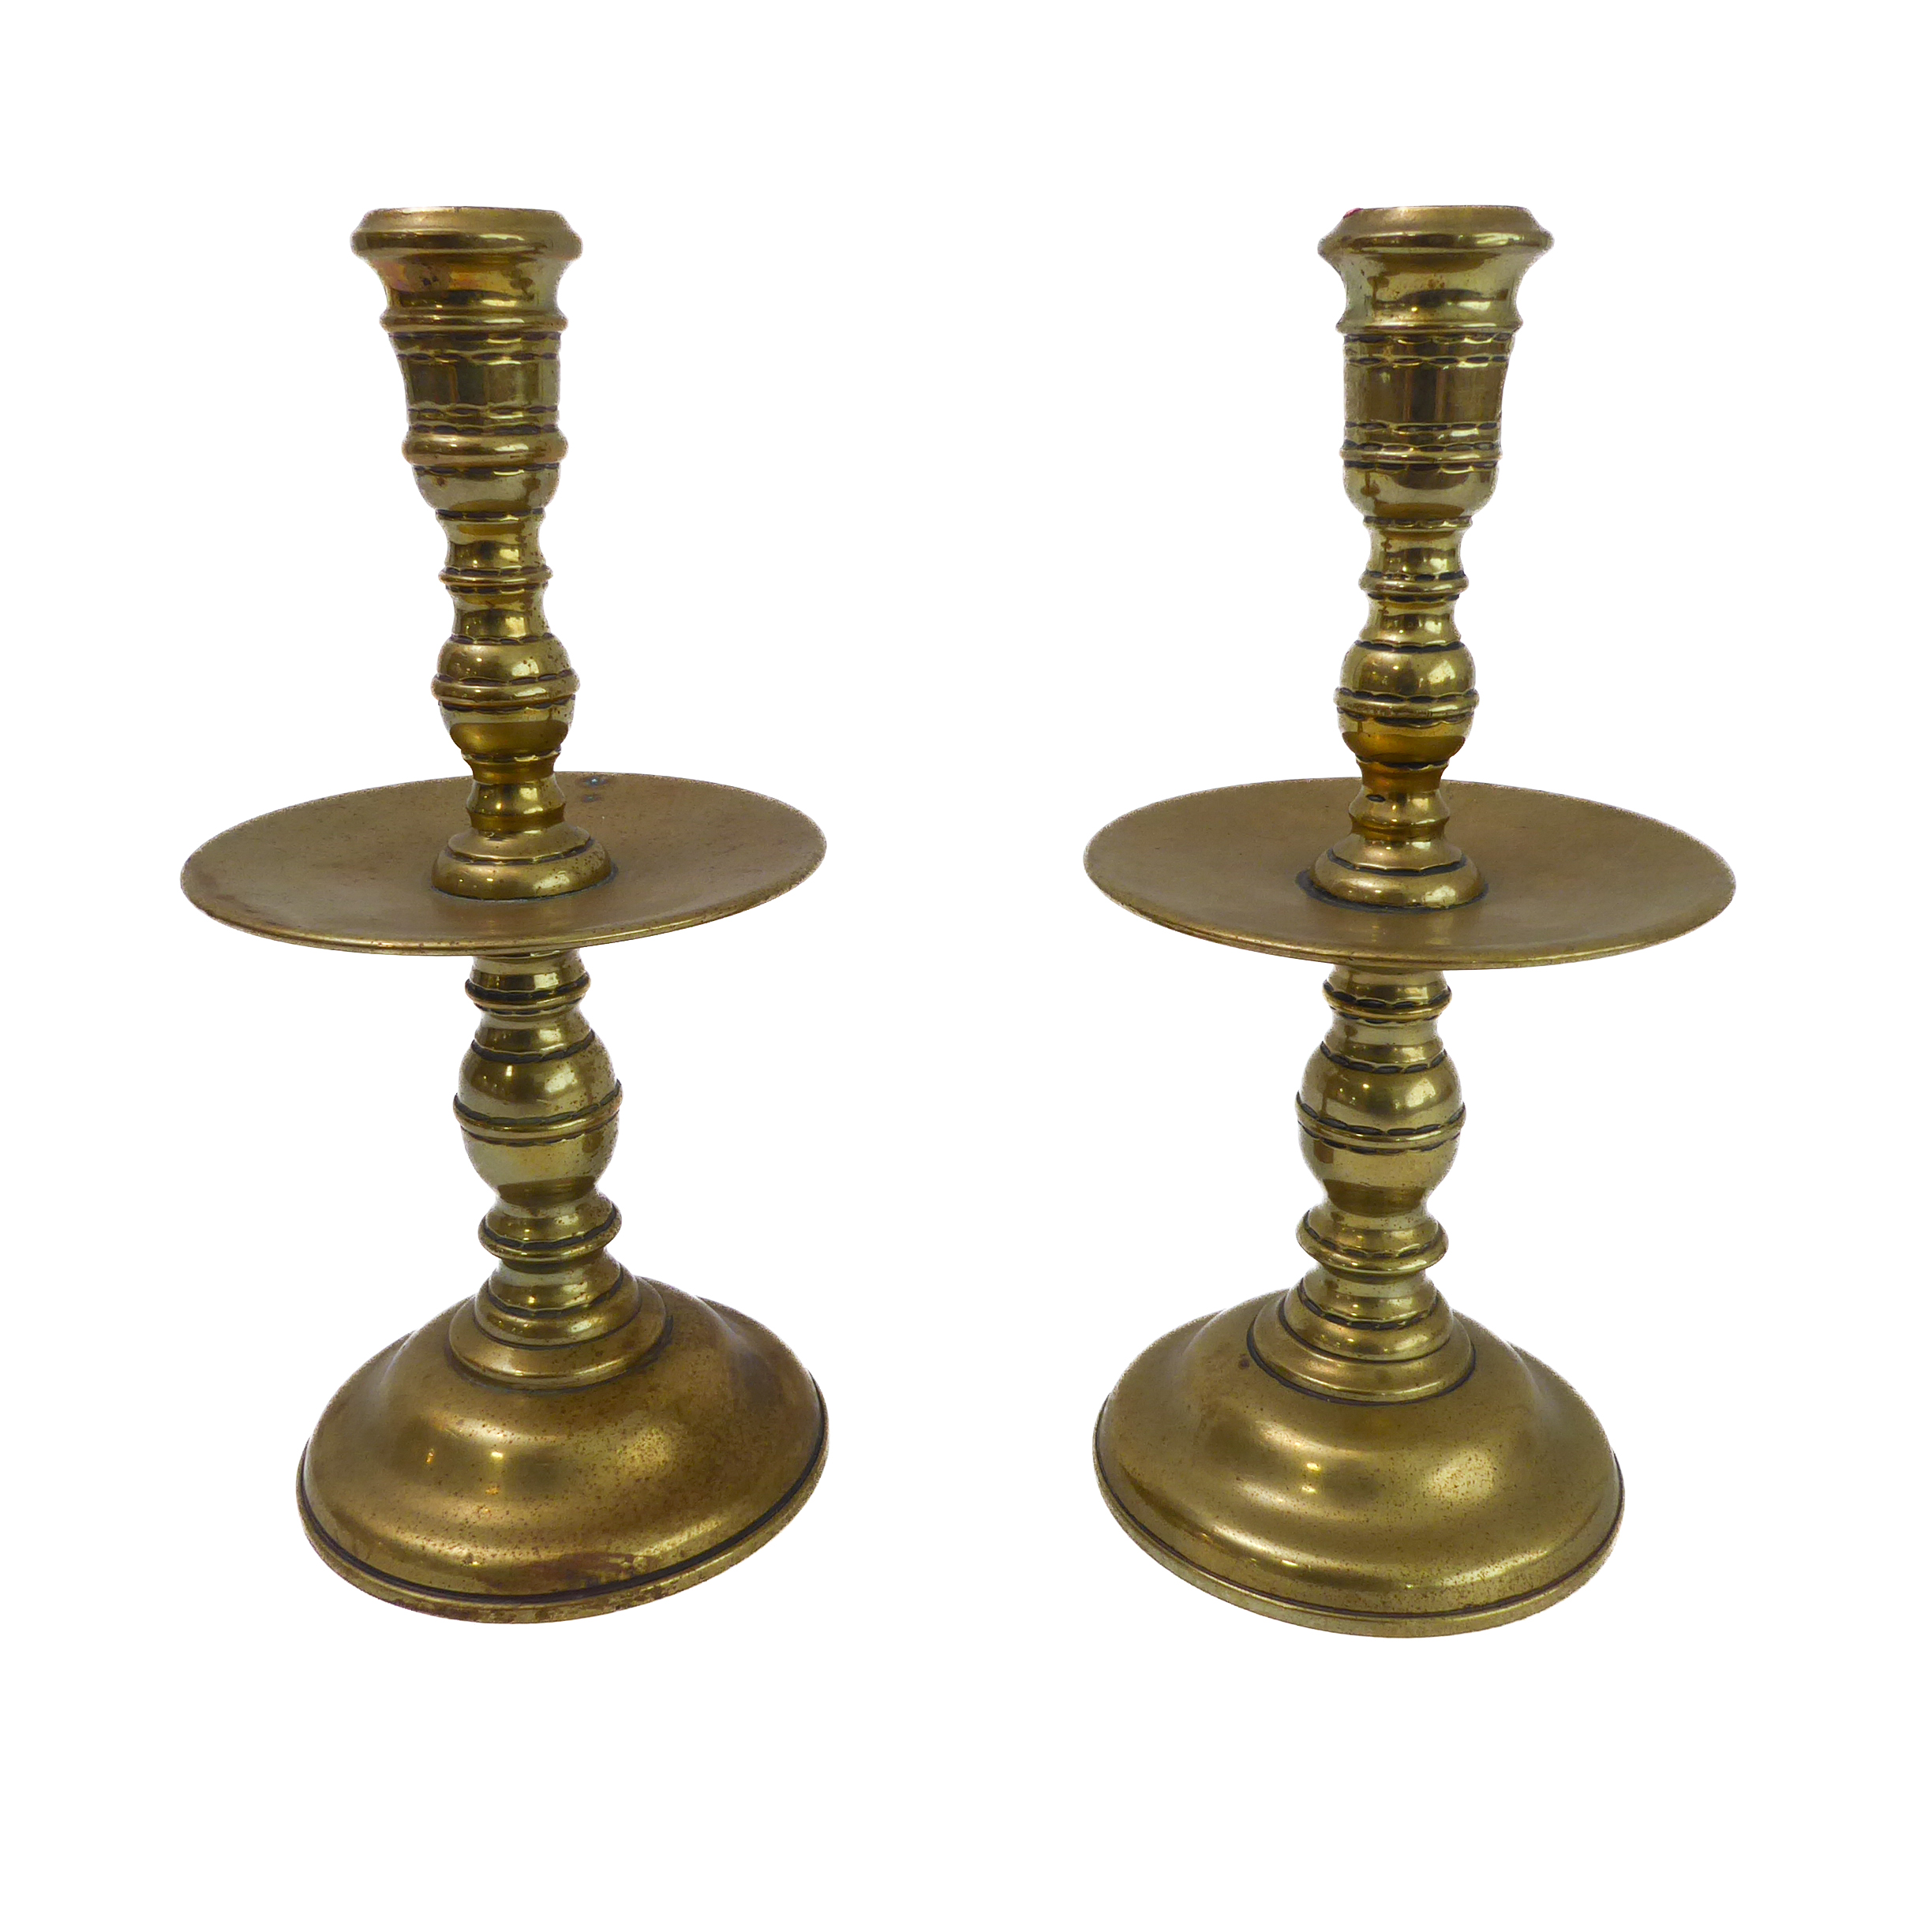 A pair of Dutch brass Heemskirk candlesticks (probably 19th century) in 17th century style) (18.5 cm